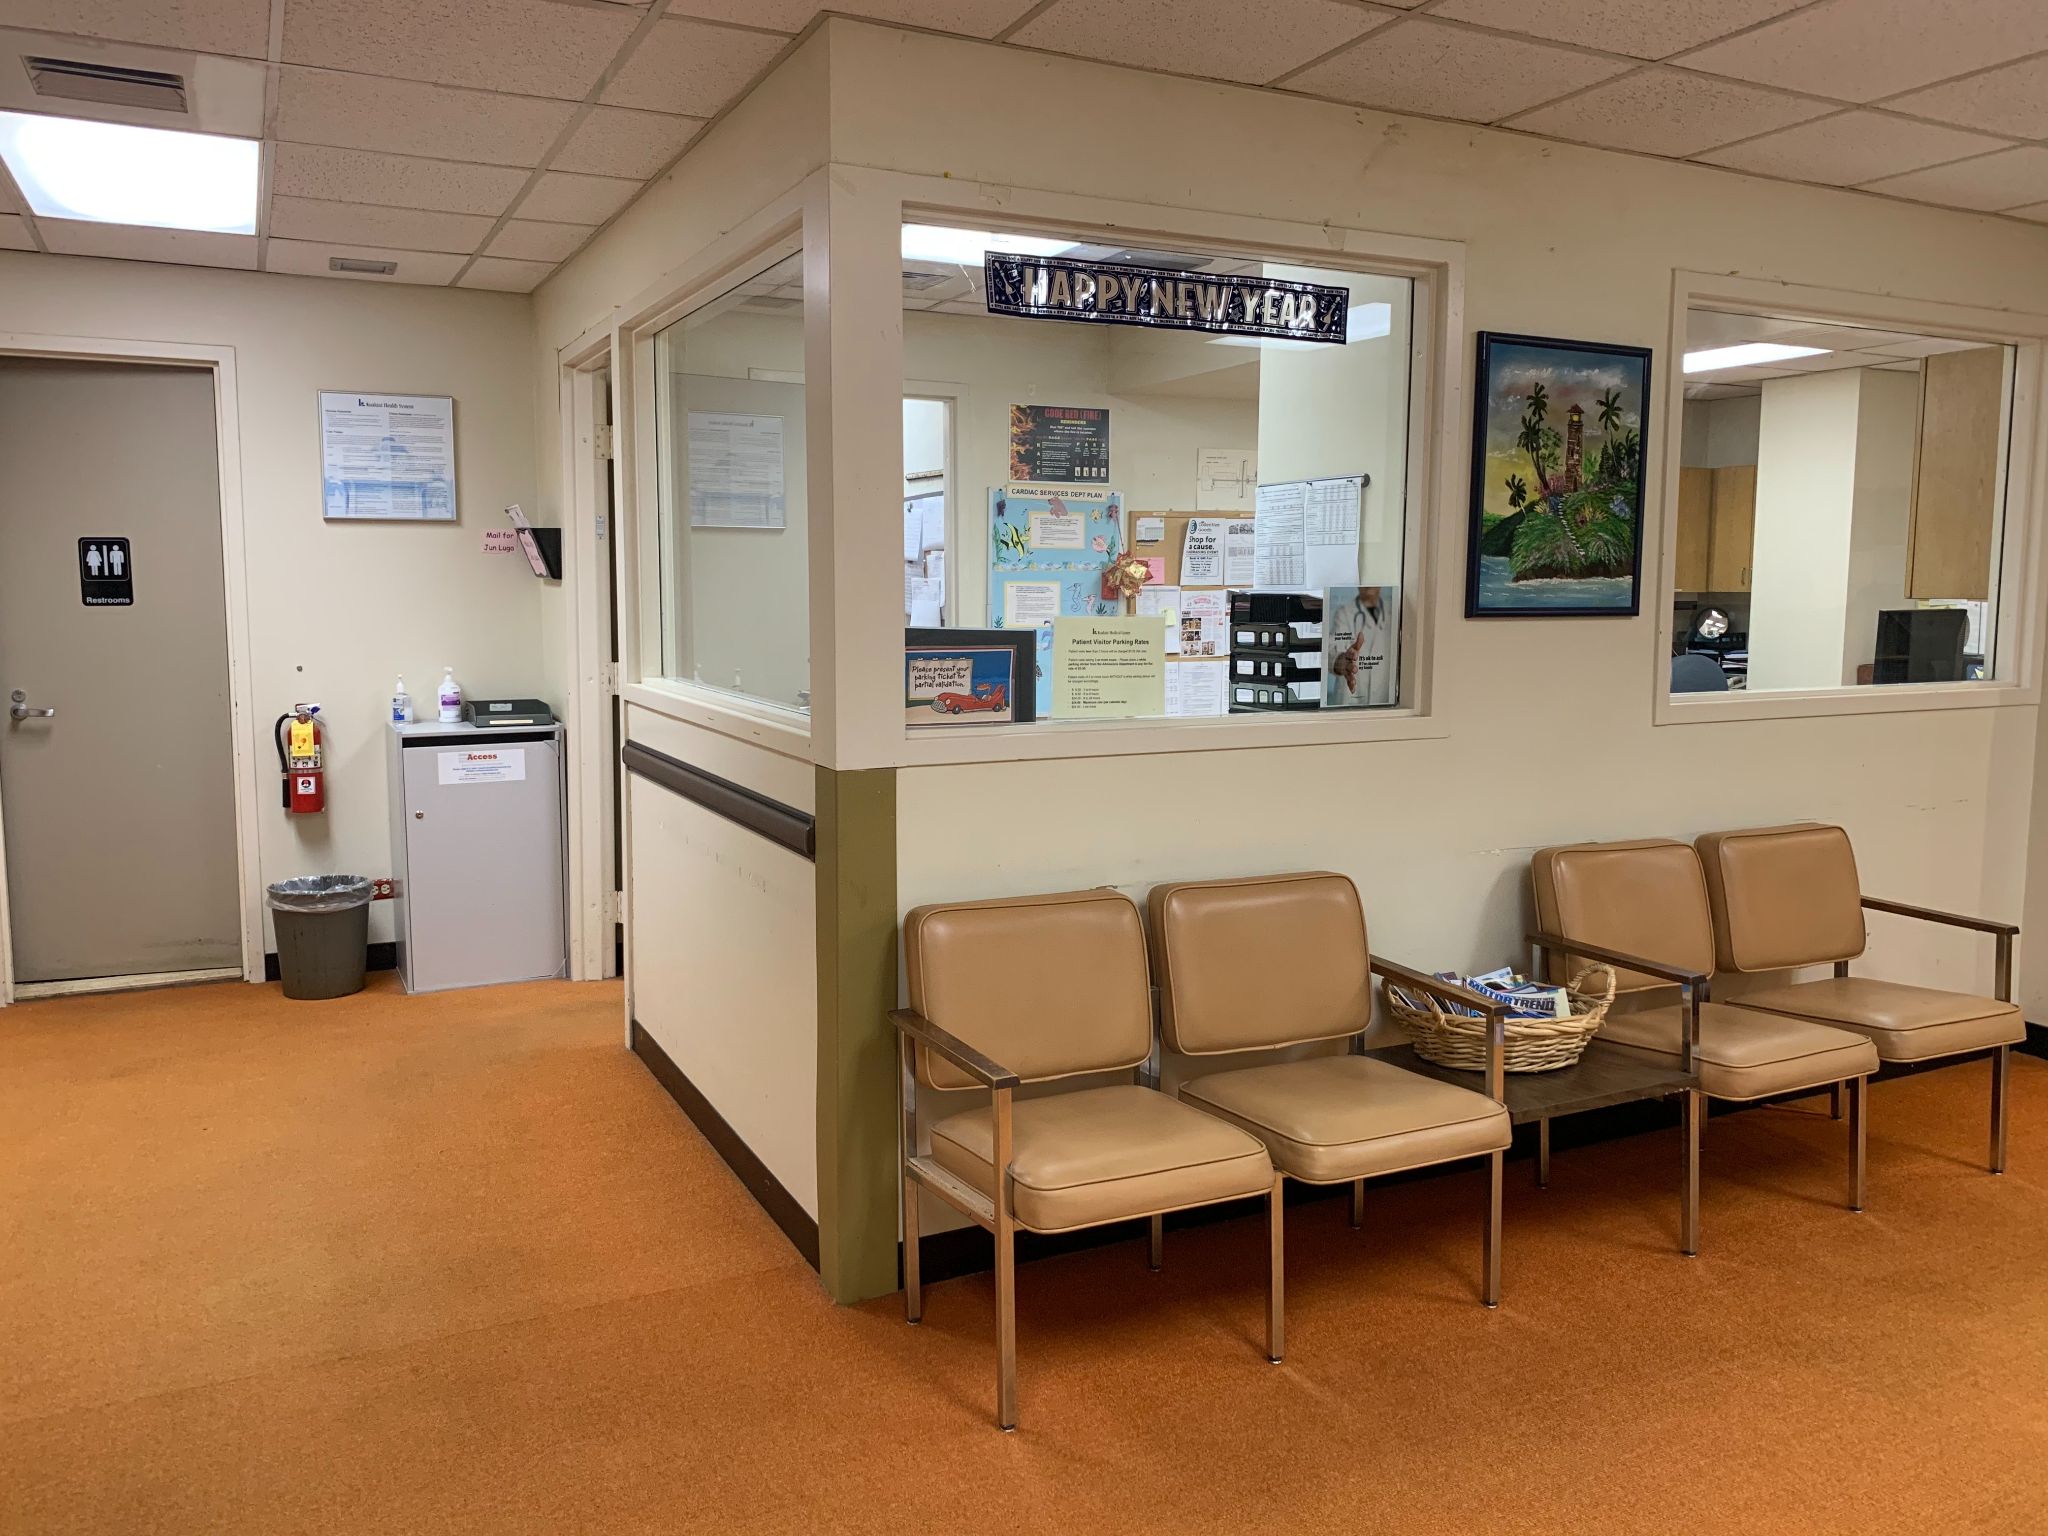 Waiting room in health care center